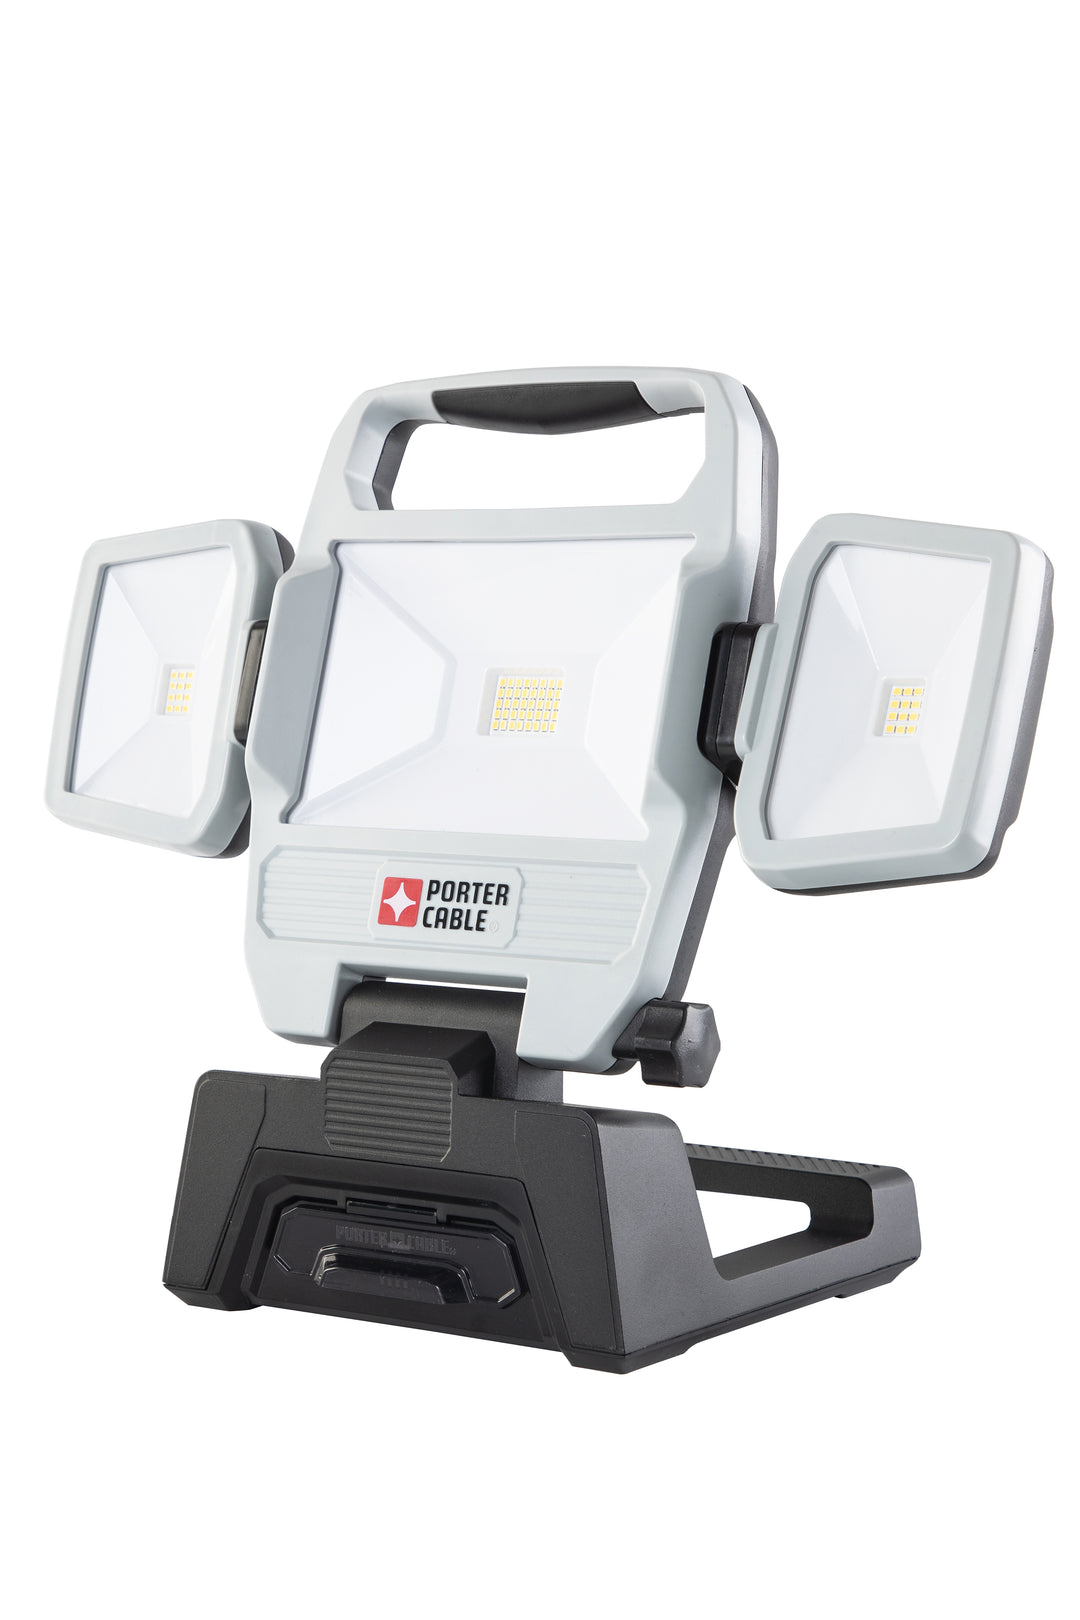 Broek Laster Vermeend PORTER-CABLE 30W 3000-Lumen Max Rechargeable LED Work Light | Permaculture  Education Center